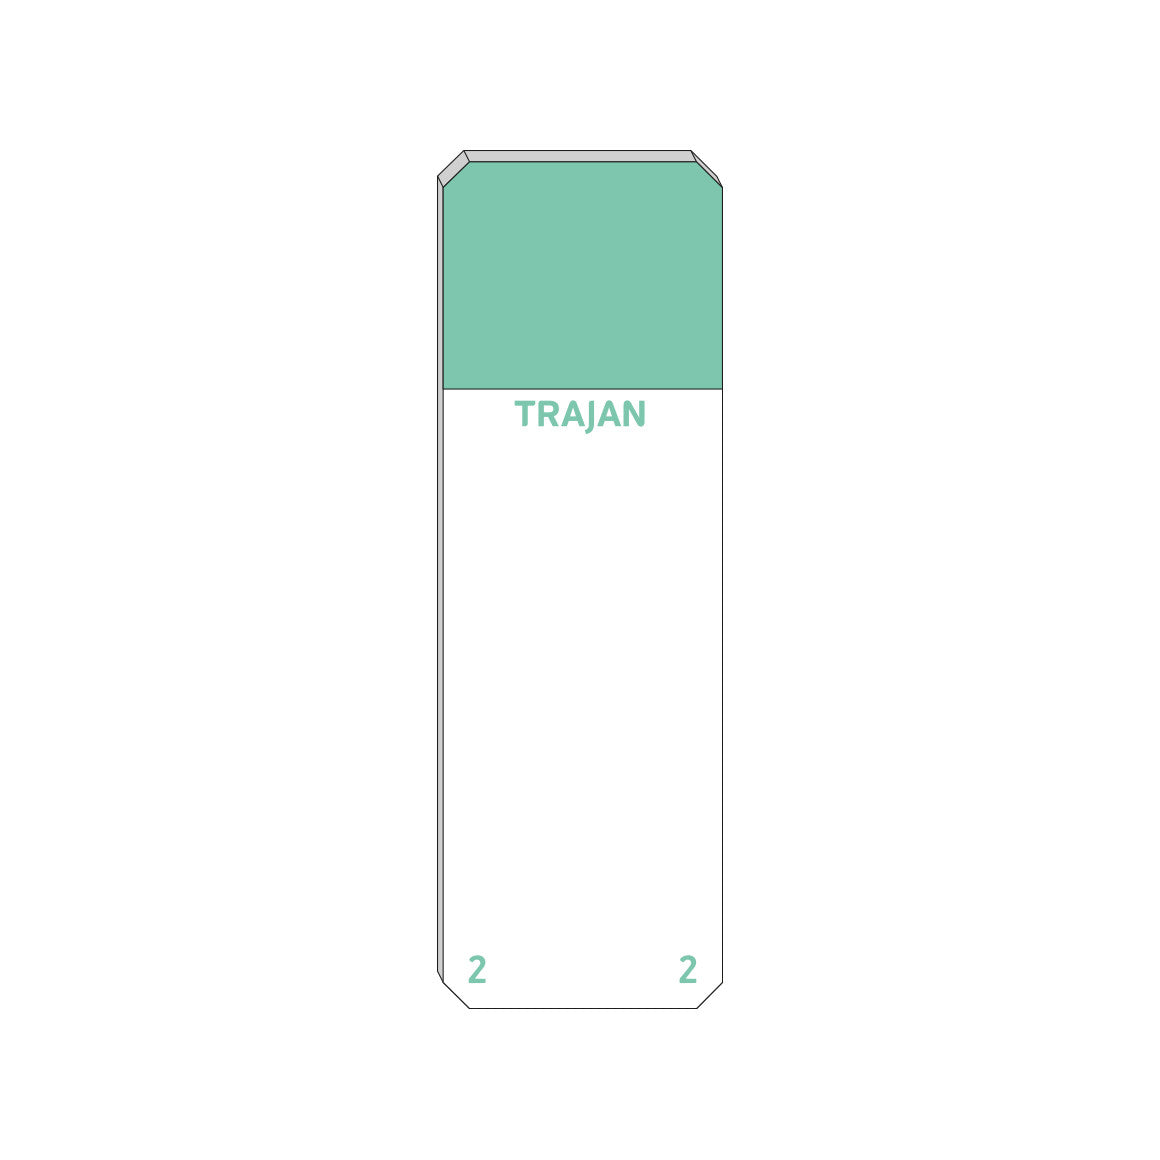 Trajan Scientific and Medical, Series 2 Adhesive Microscope Slides, Green, Frost 20 mm, 75 mm x 25 mm